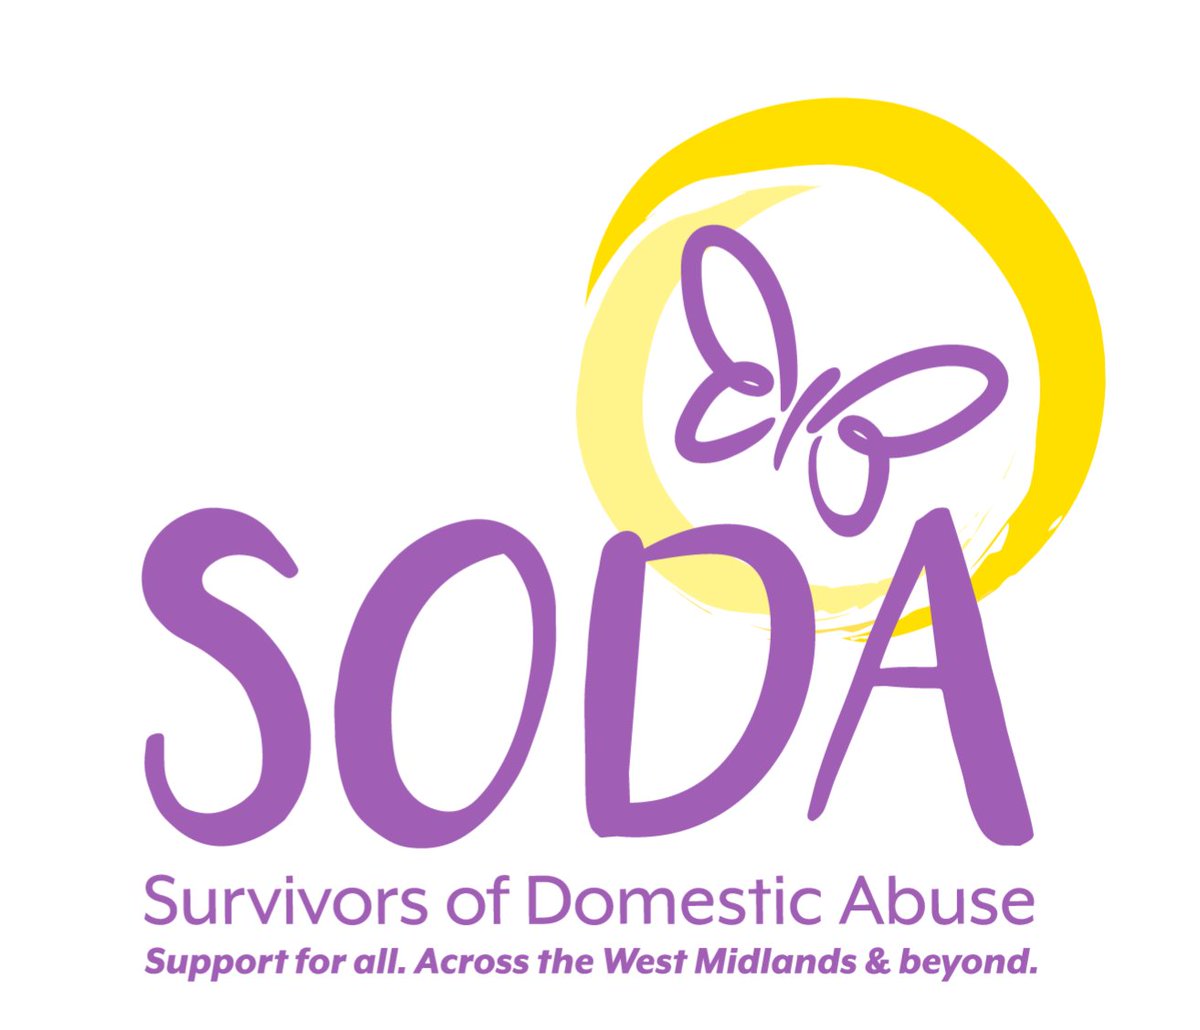 Good morning everyone I am the founder of SODA which stands for Survivors of Domestic Abuse. SODA raises awareness, reduces isolation and supports those who have experienced domestic abuse, focusing on life after abuse. #DomesticAbuse #LivedExperience #spokesperson